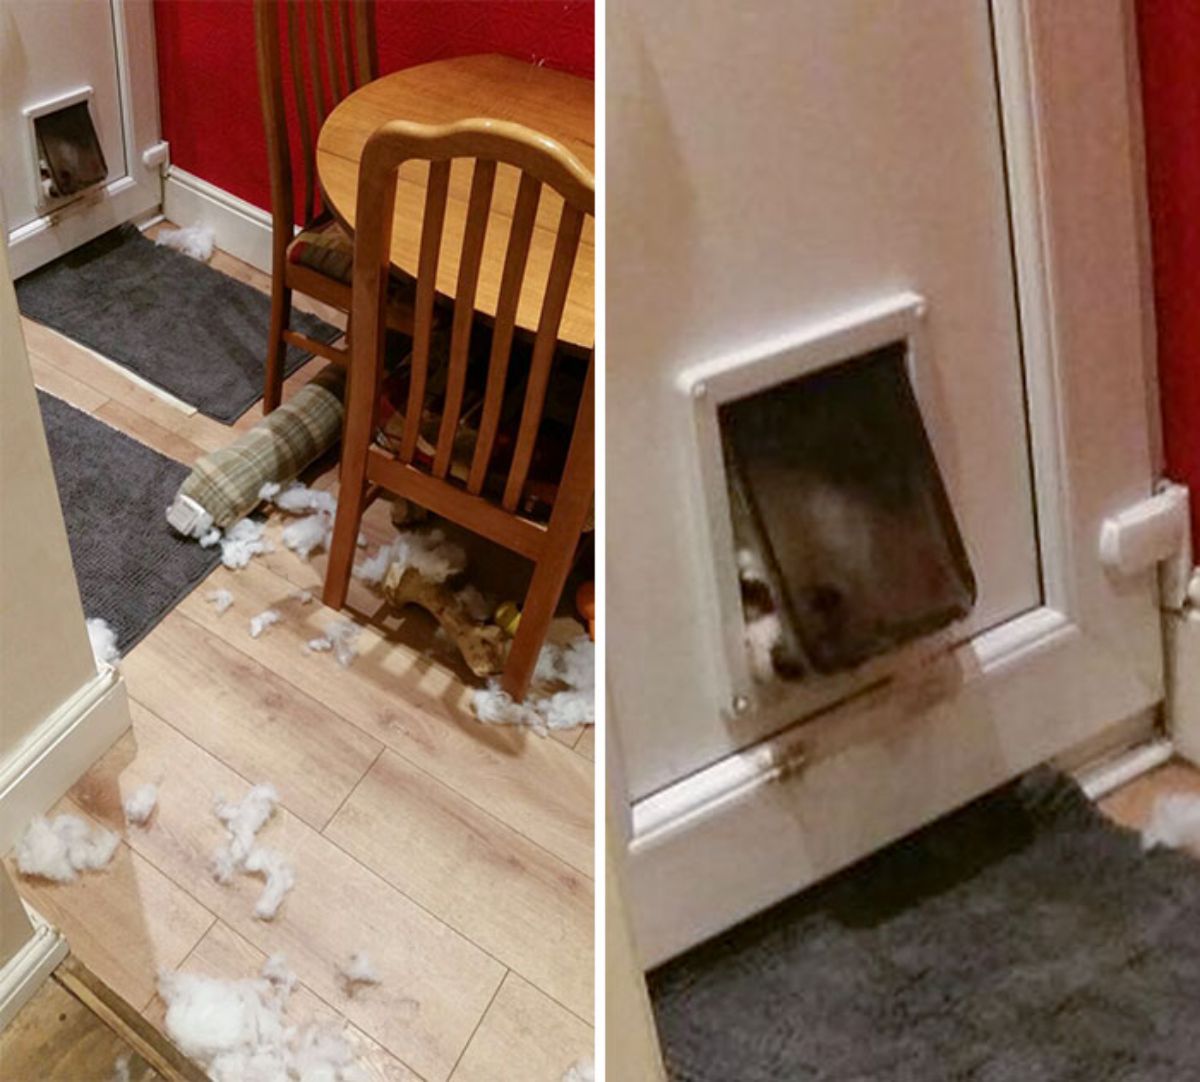 1 photo of a room with white stuffing on the floor and 1 photo of a close up of a white and brown dog sticking their face through a dog door